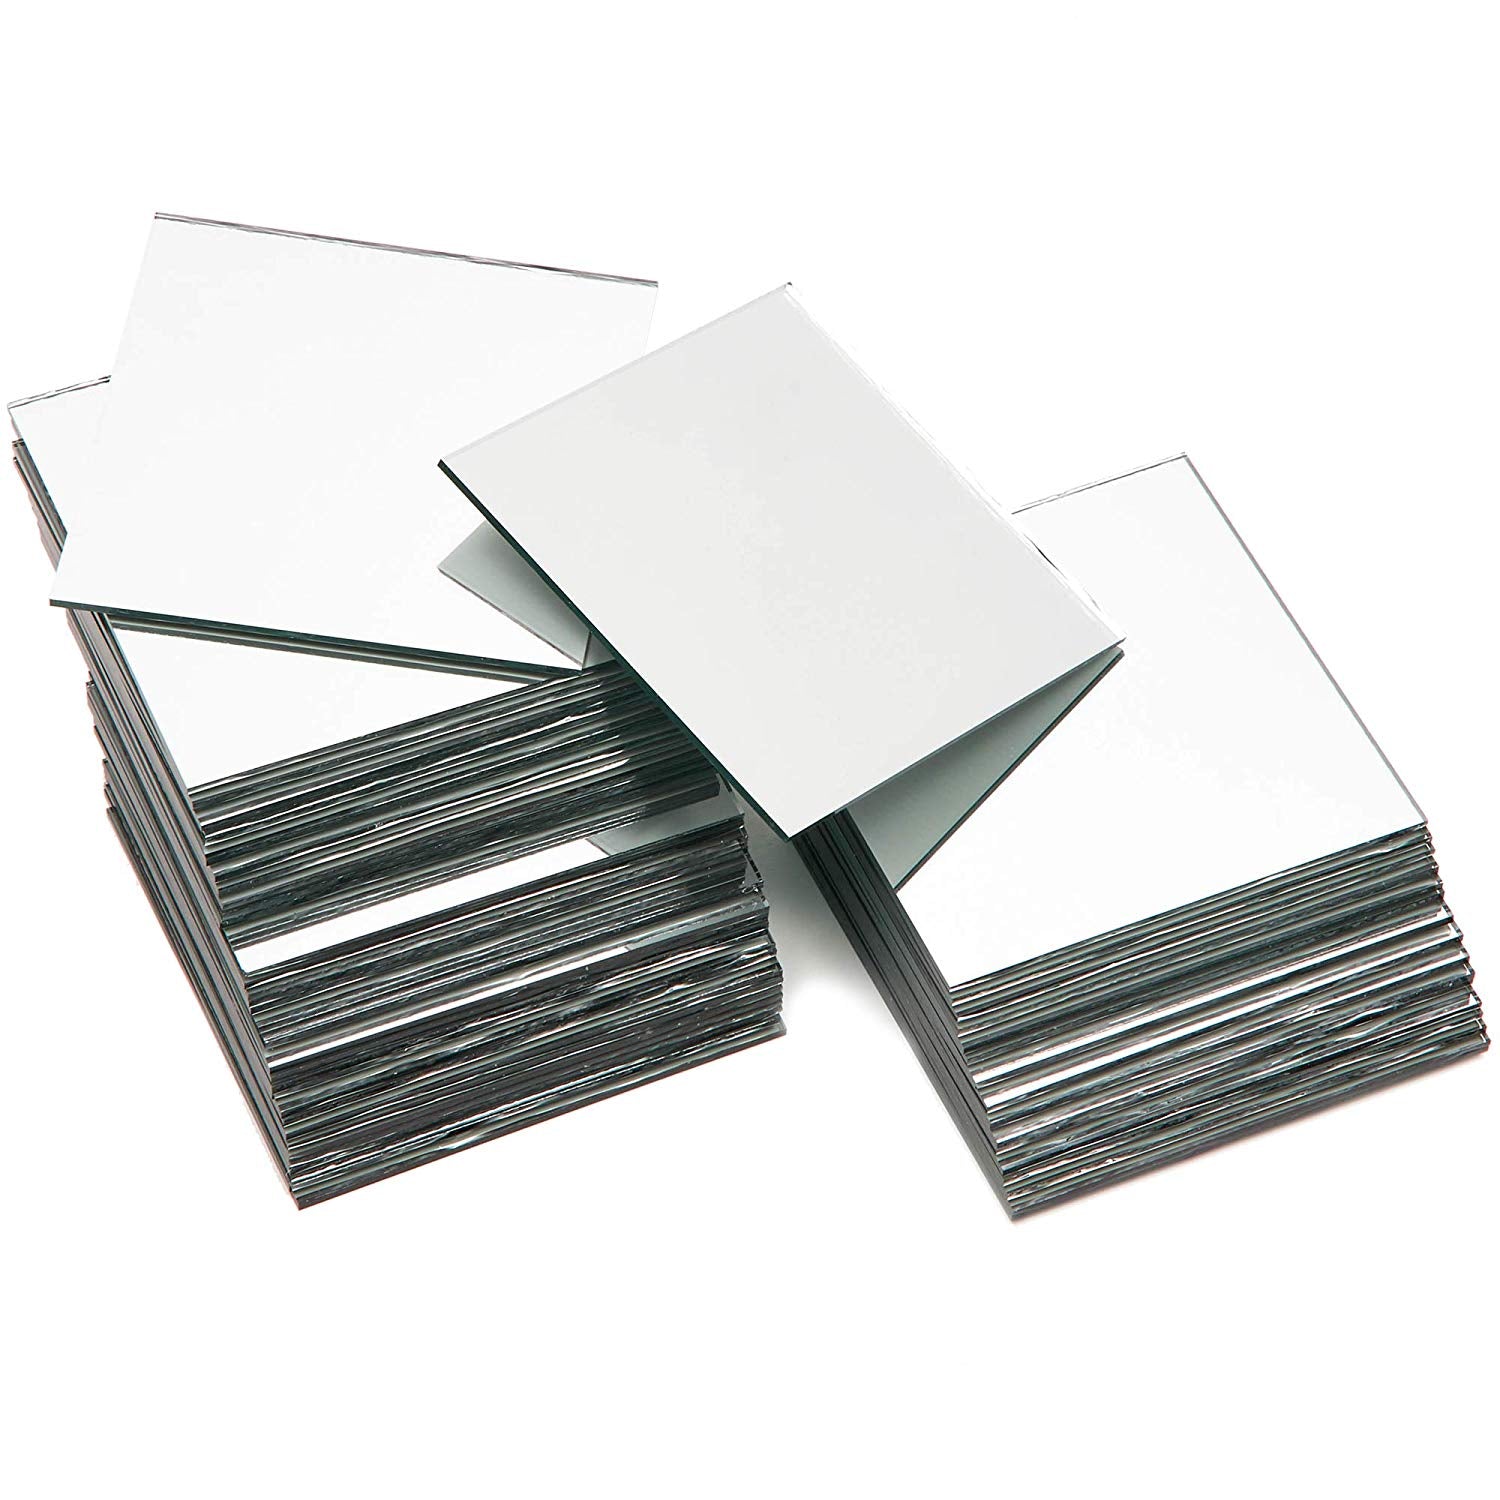 Decorative Square Mirror Tiles for Crafts - Set of 120